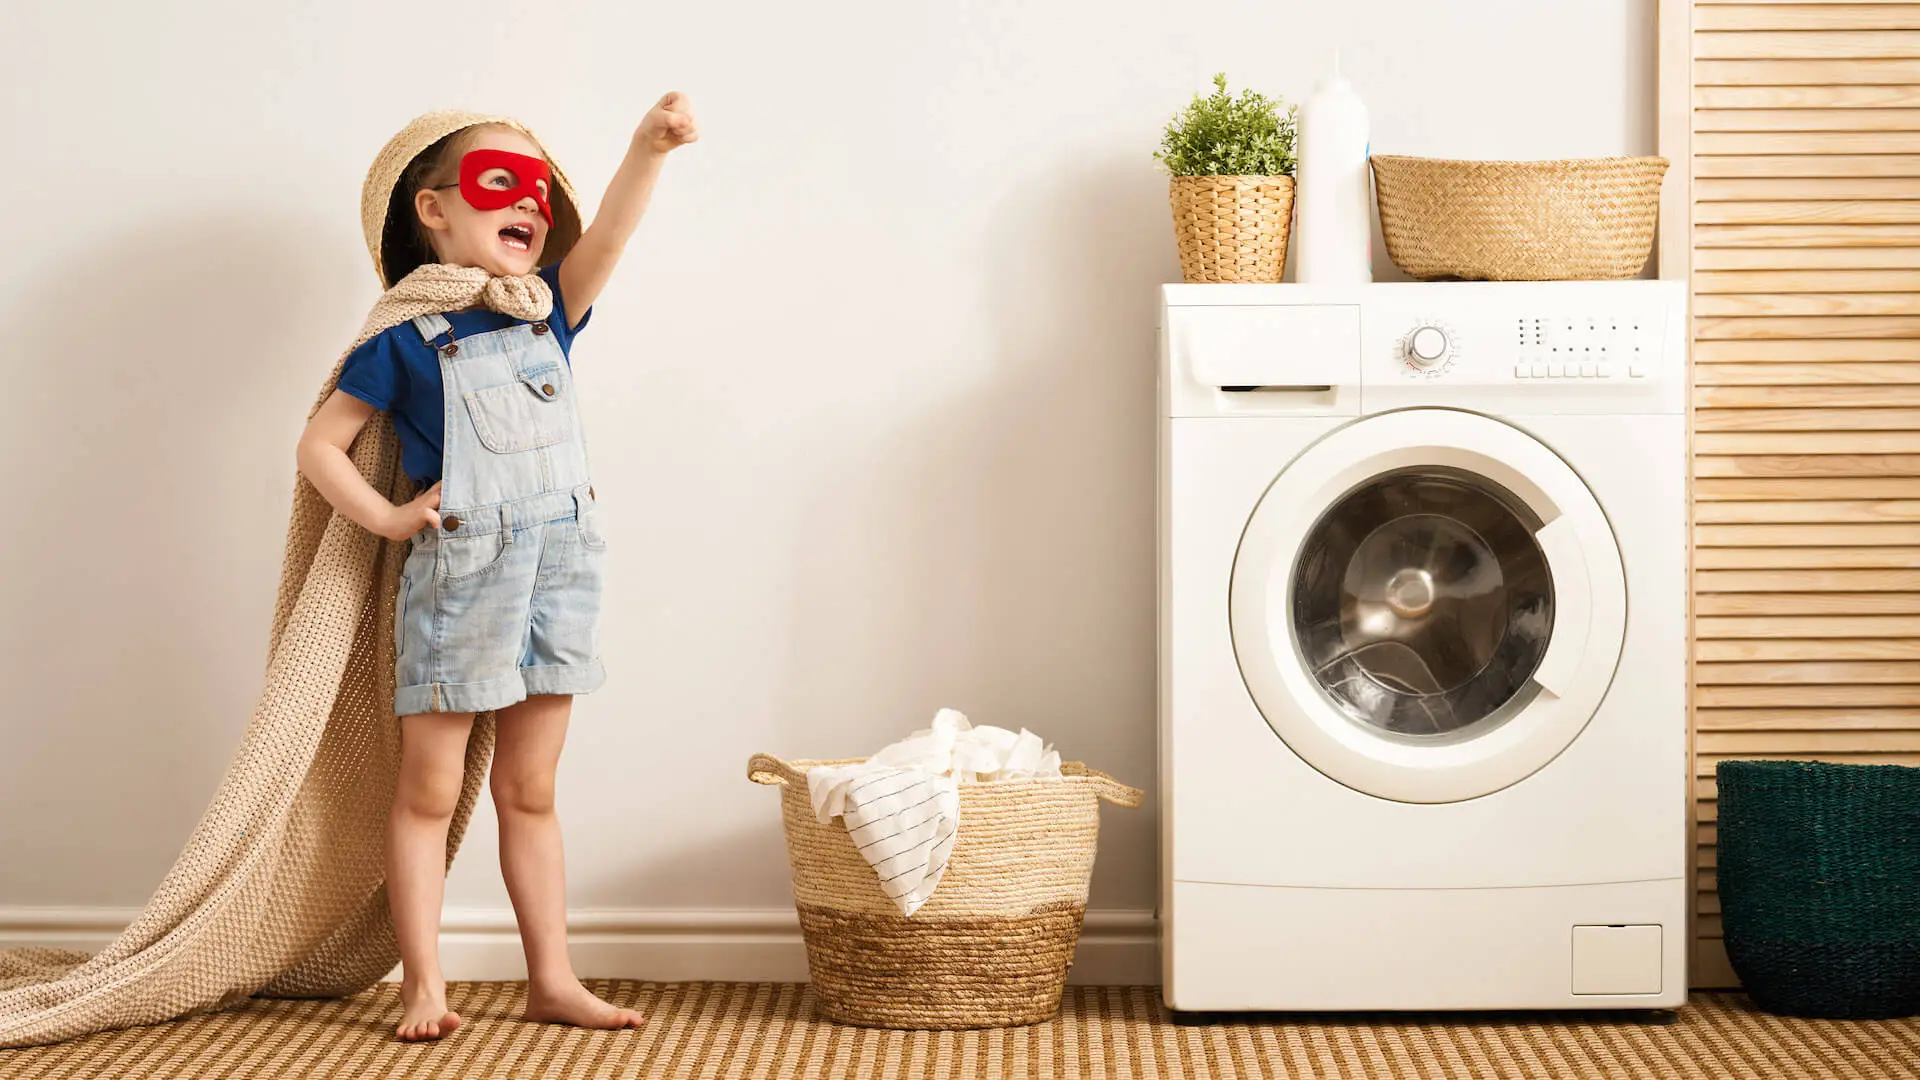 Little girl dressed as a hero in a laundry room